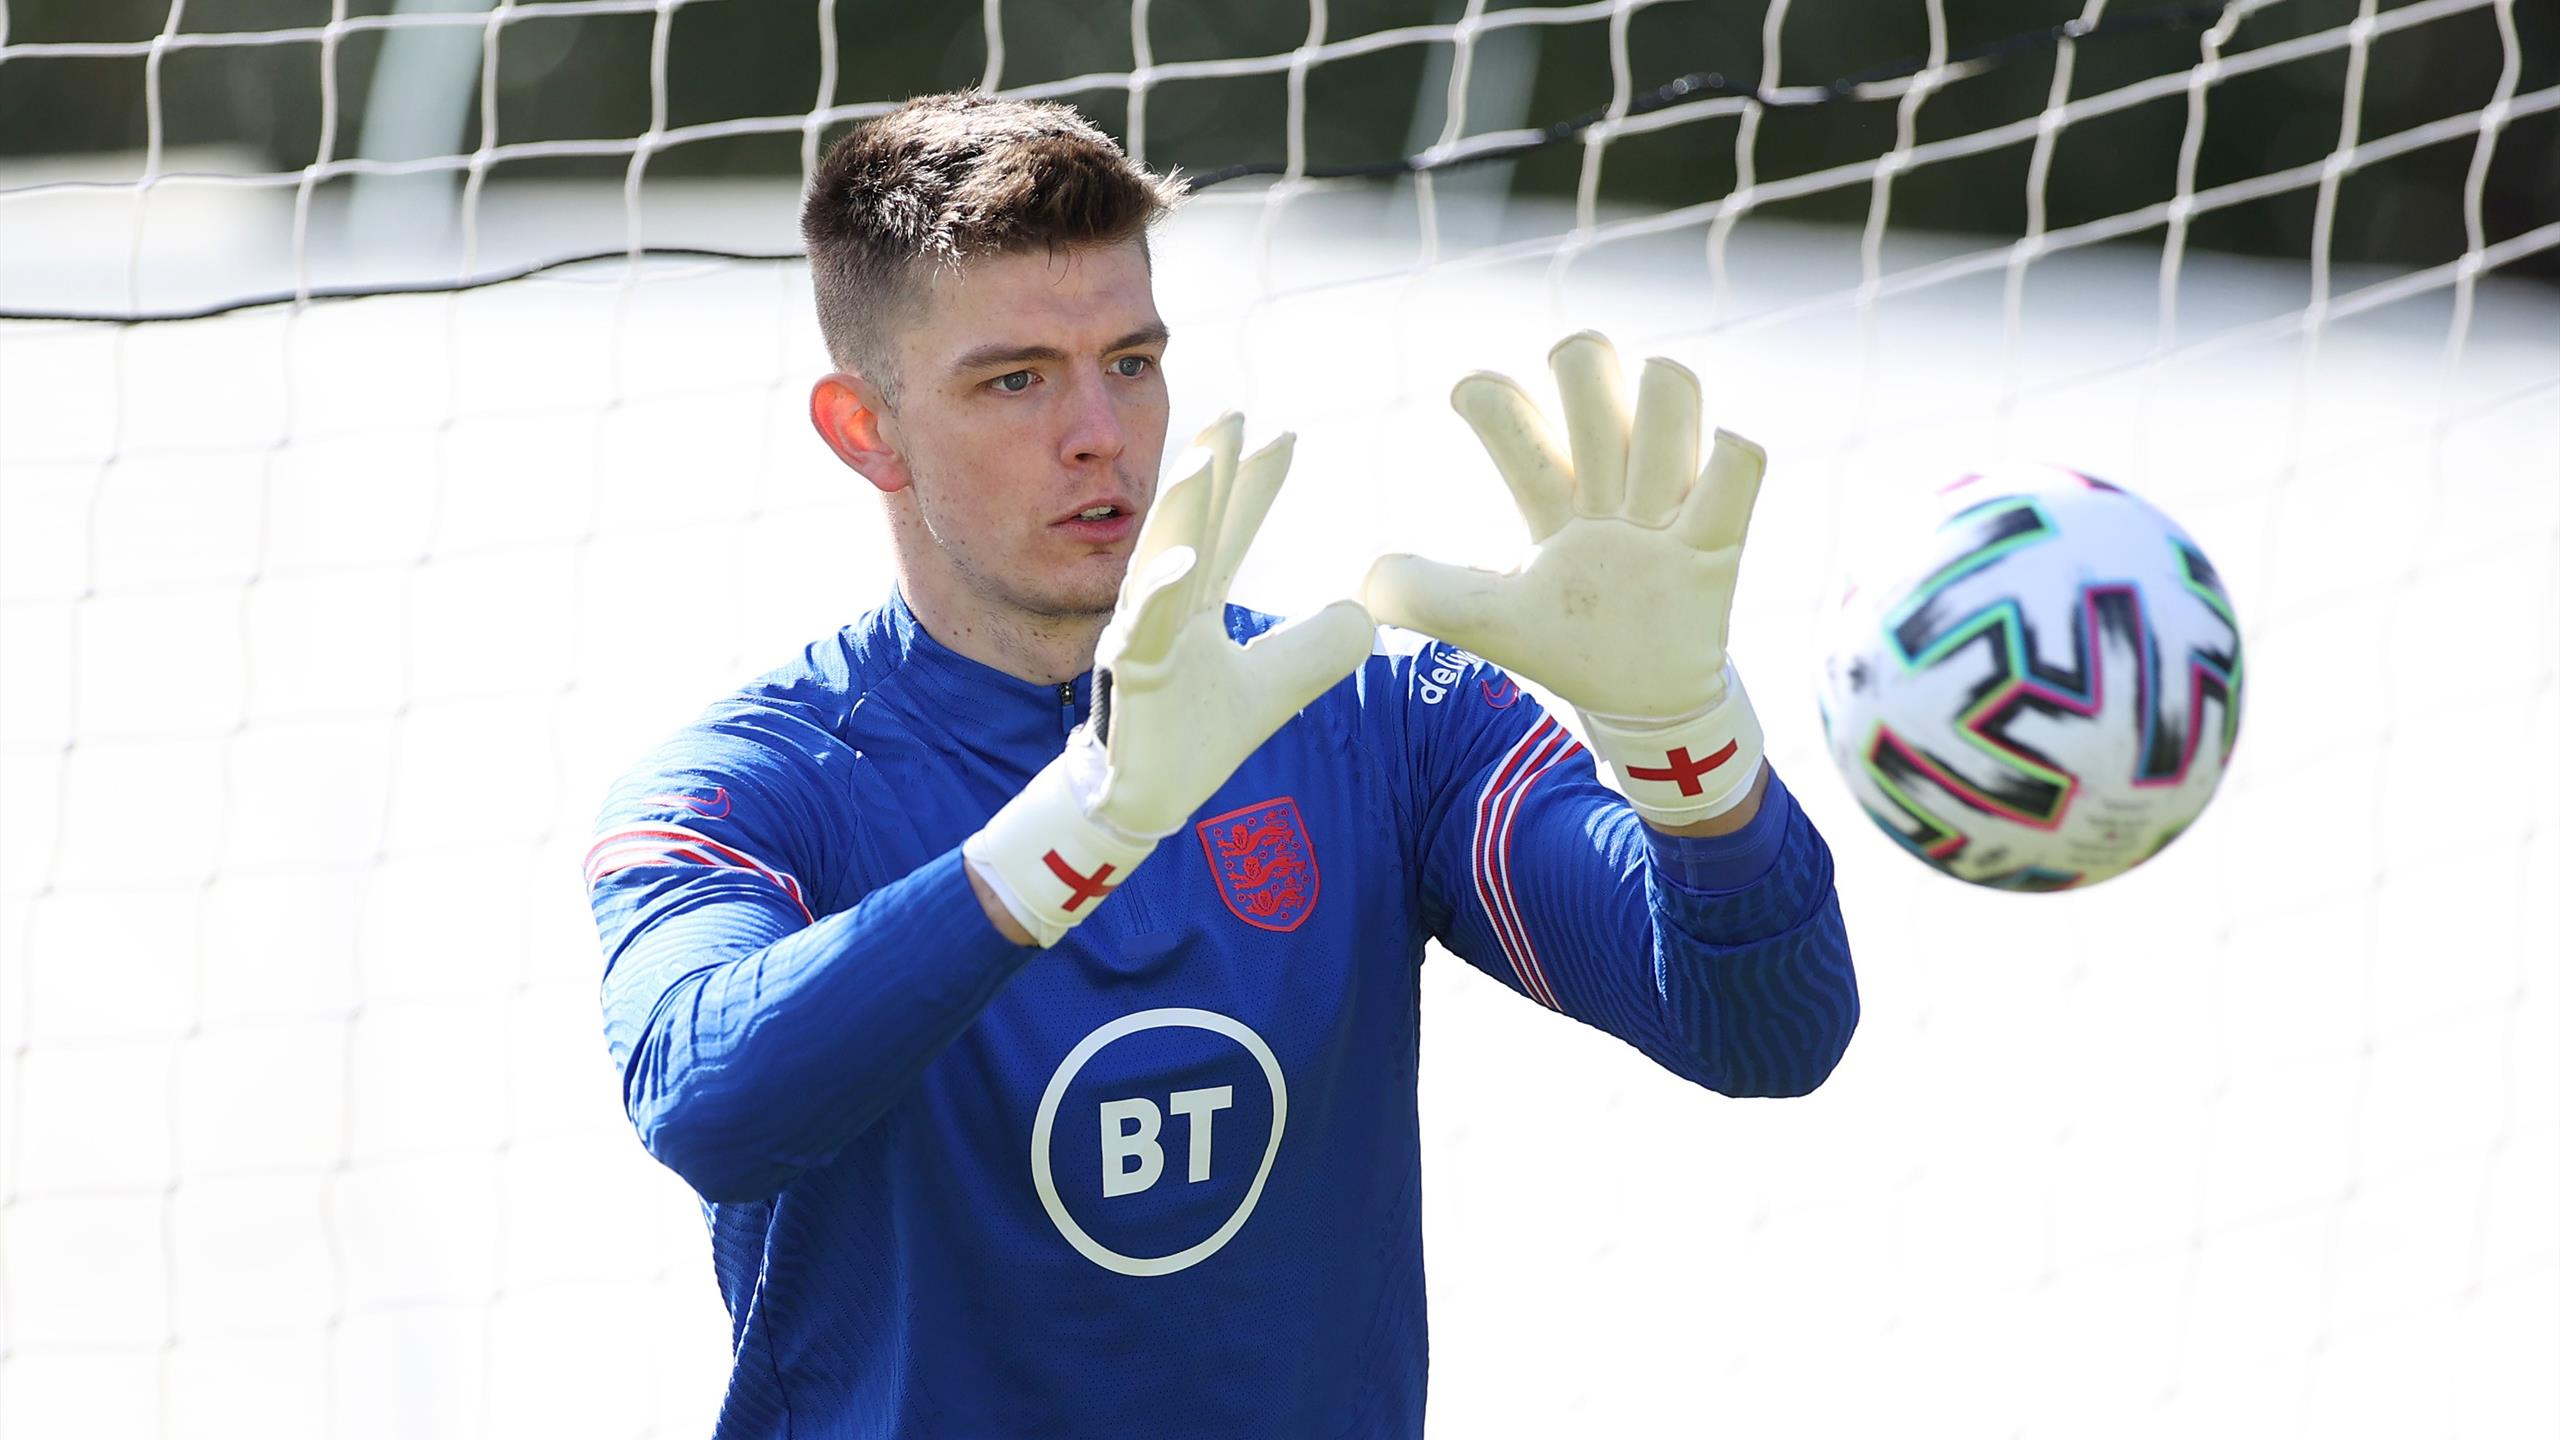 A lot of interest in him from other clubs' United confirm deal to sign Nick Pope from Burnley